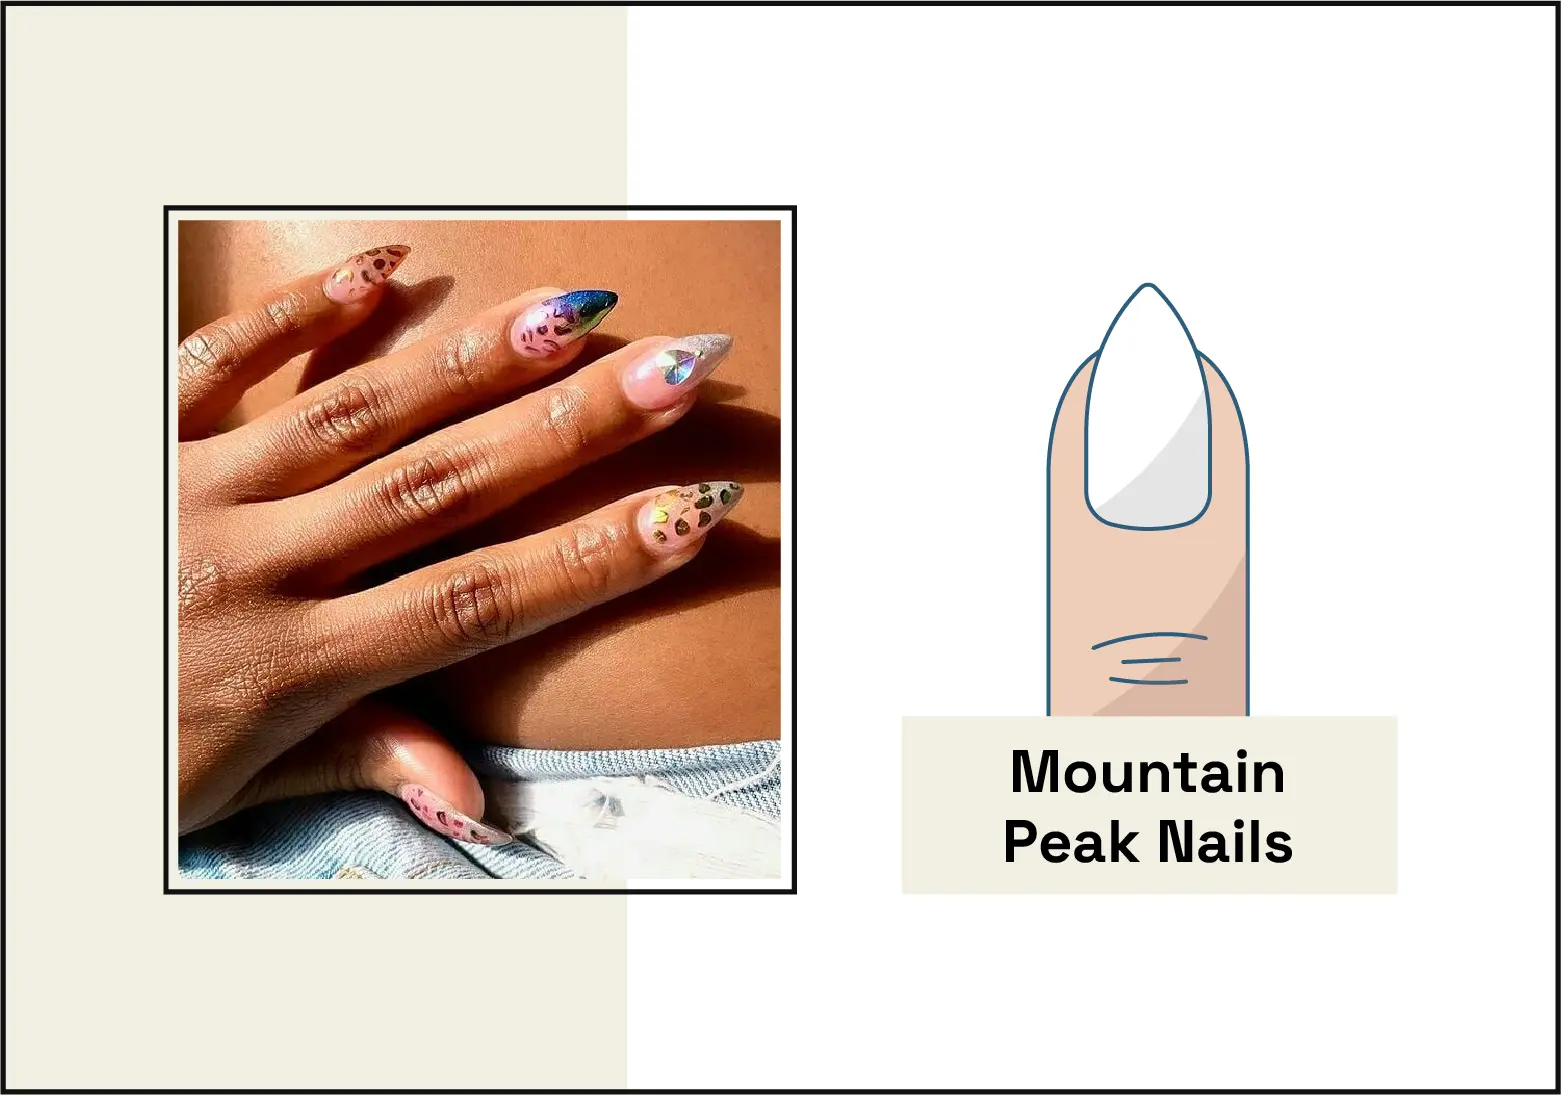 photo of manicure with mountain peak-shaped nails with colorful nail art on the left, illustration of the mountain peak nail shape on the right